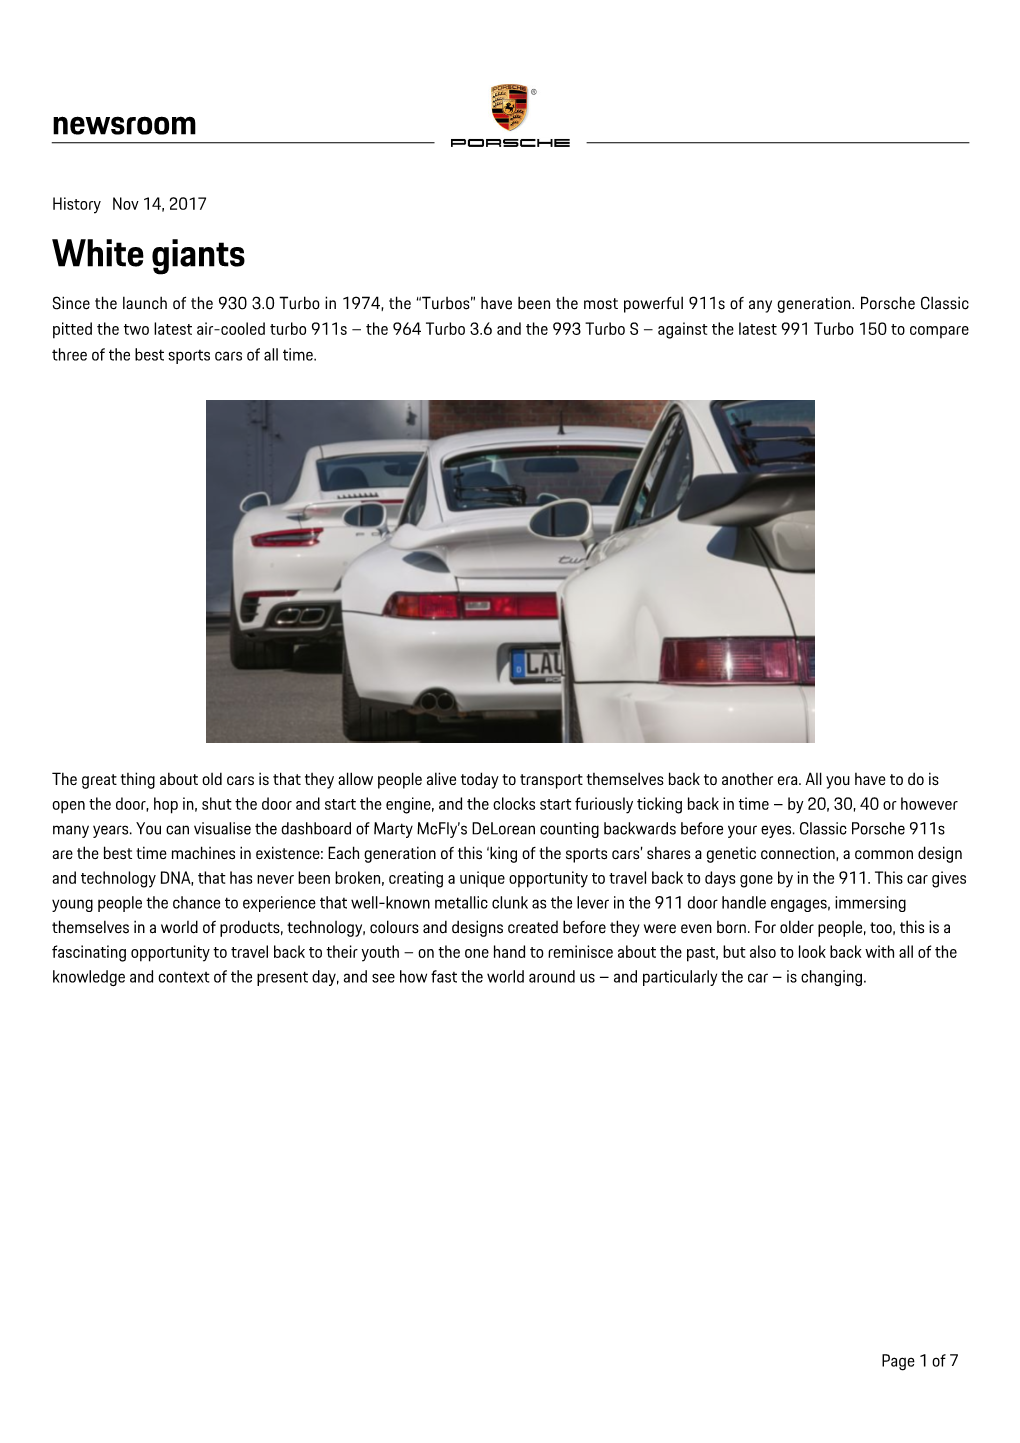 White Giants Since the Launch of the 930 3.0 Turbo in 1974, the “Turbos” Have Been the Most Powerful 911S of Any Generation